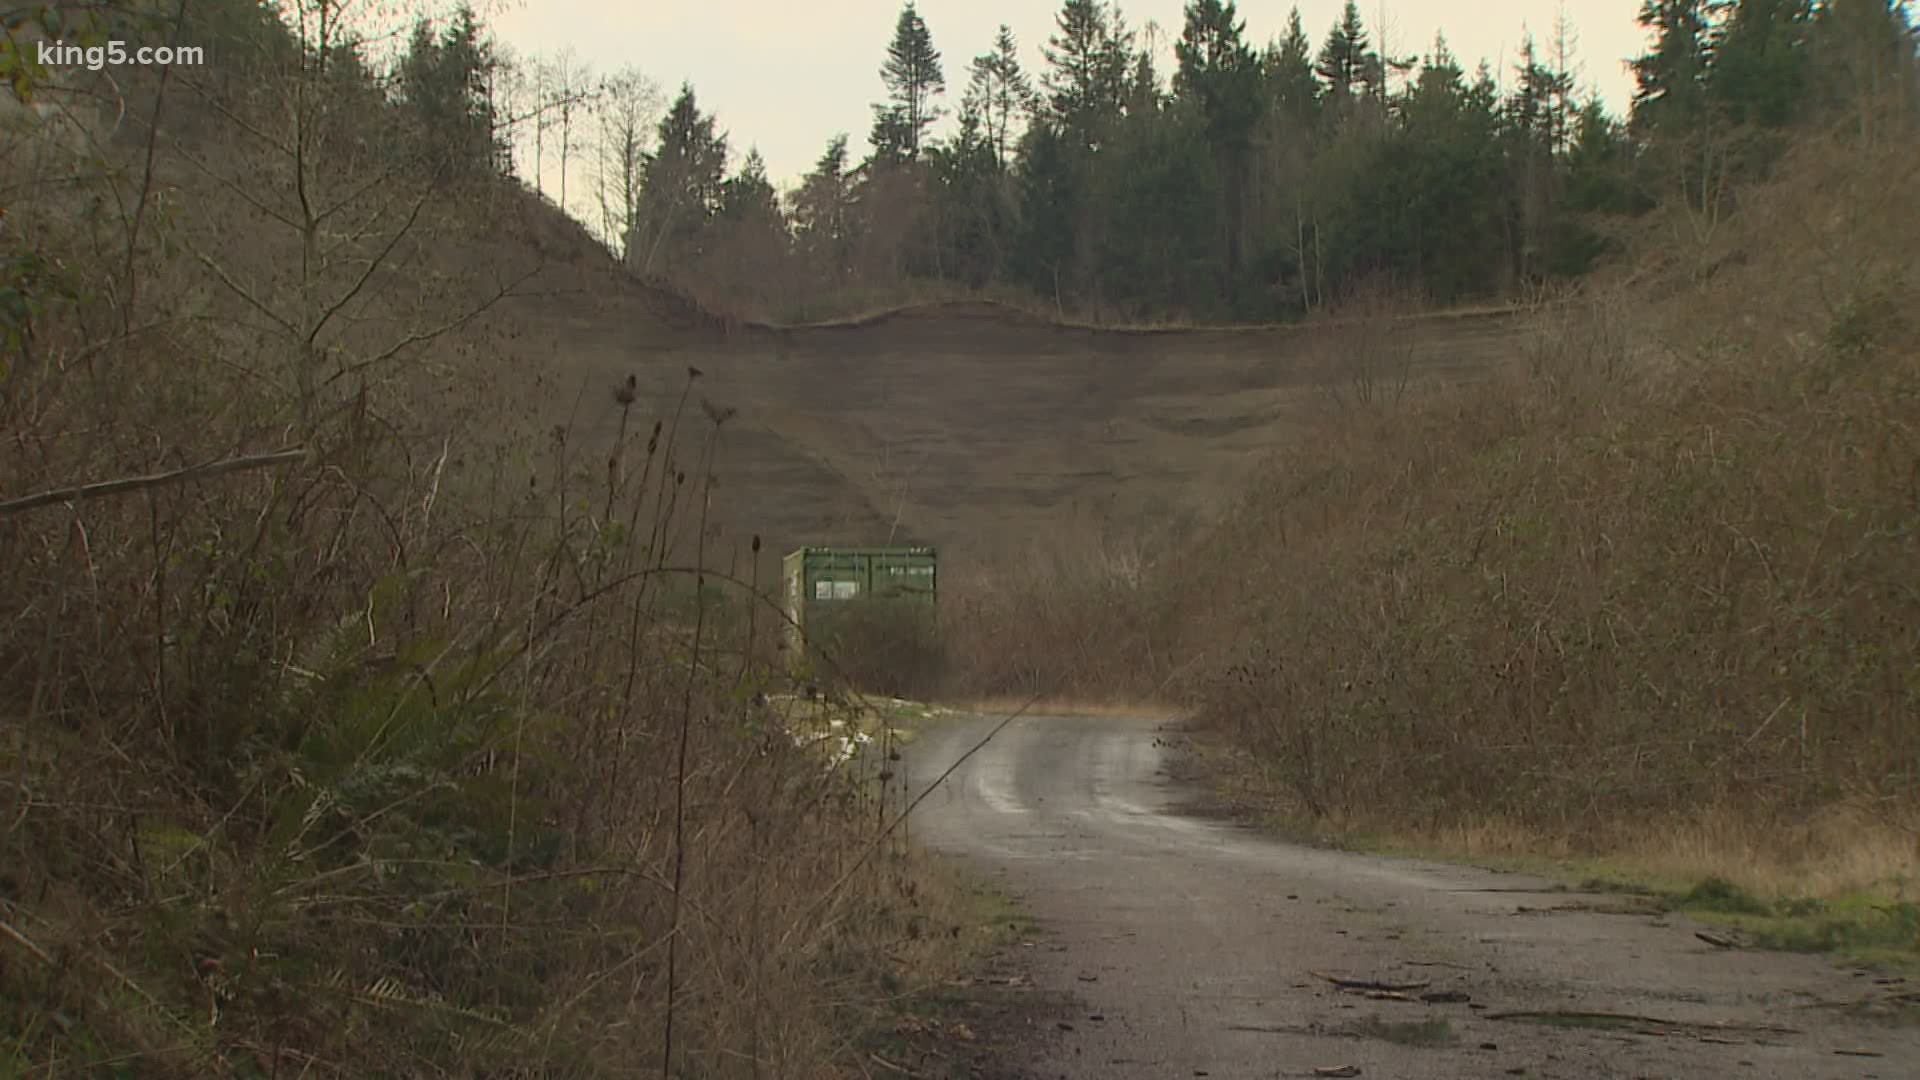 The expansion of a Skagit County gravel pit would more than triple its size and neighbors are concerned about the potential impacts.